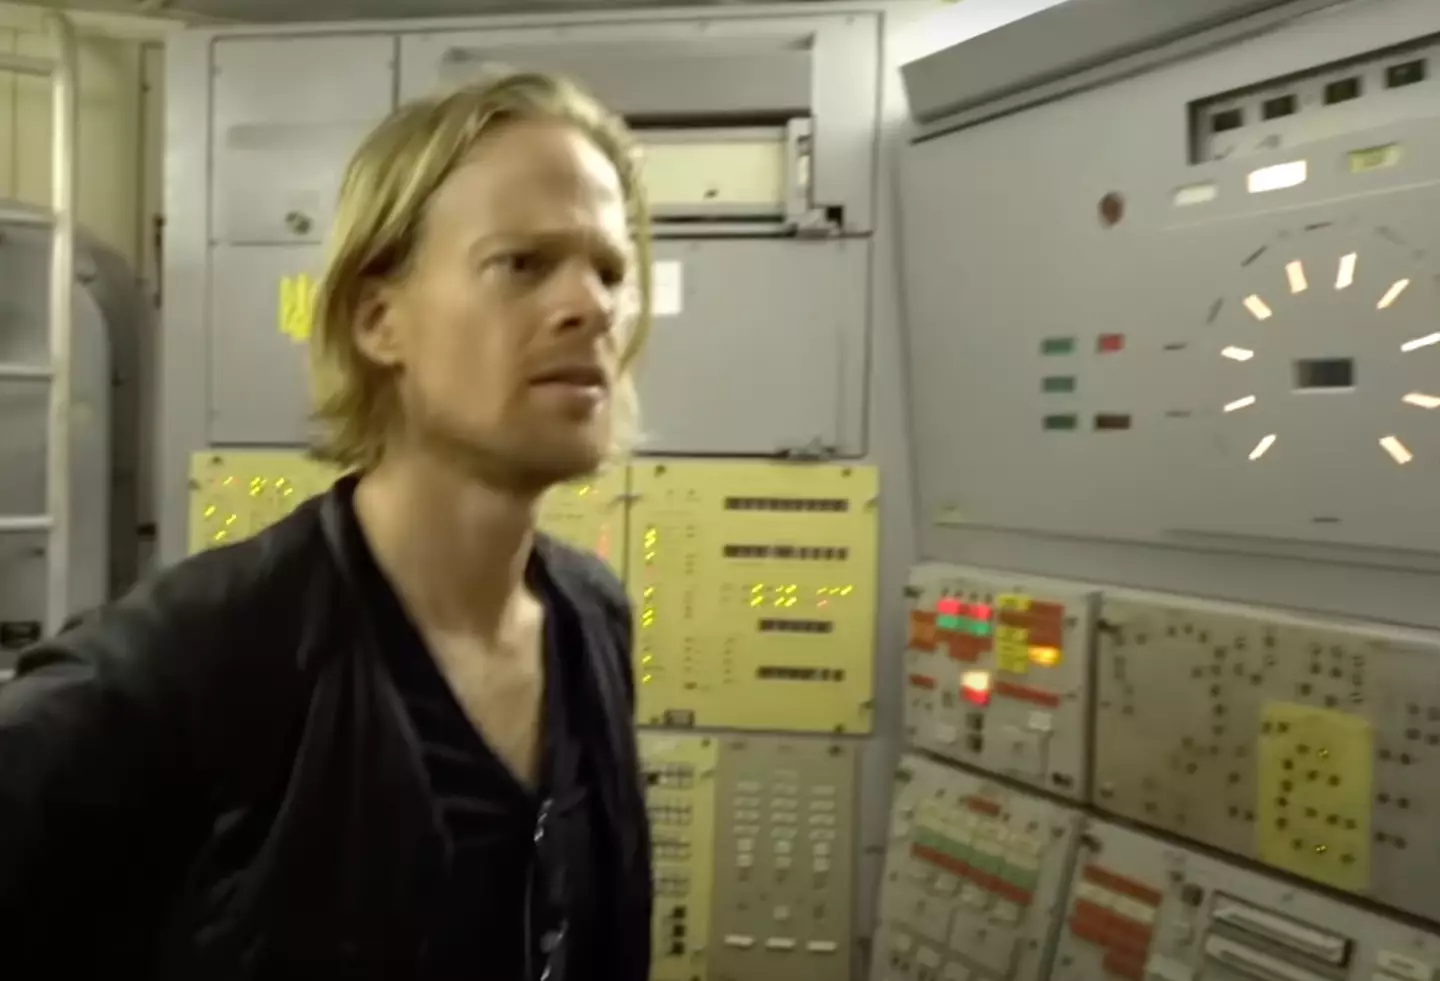 Drew Scanlon visited a Ukraine nuclear facility back in 2017.